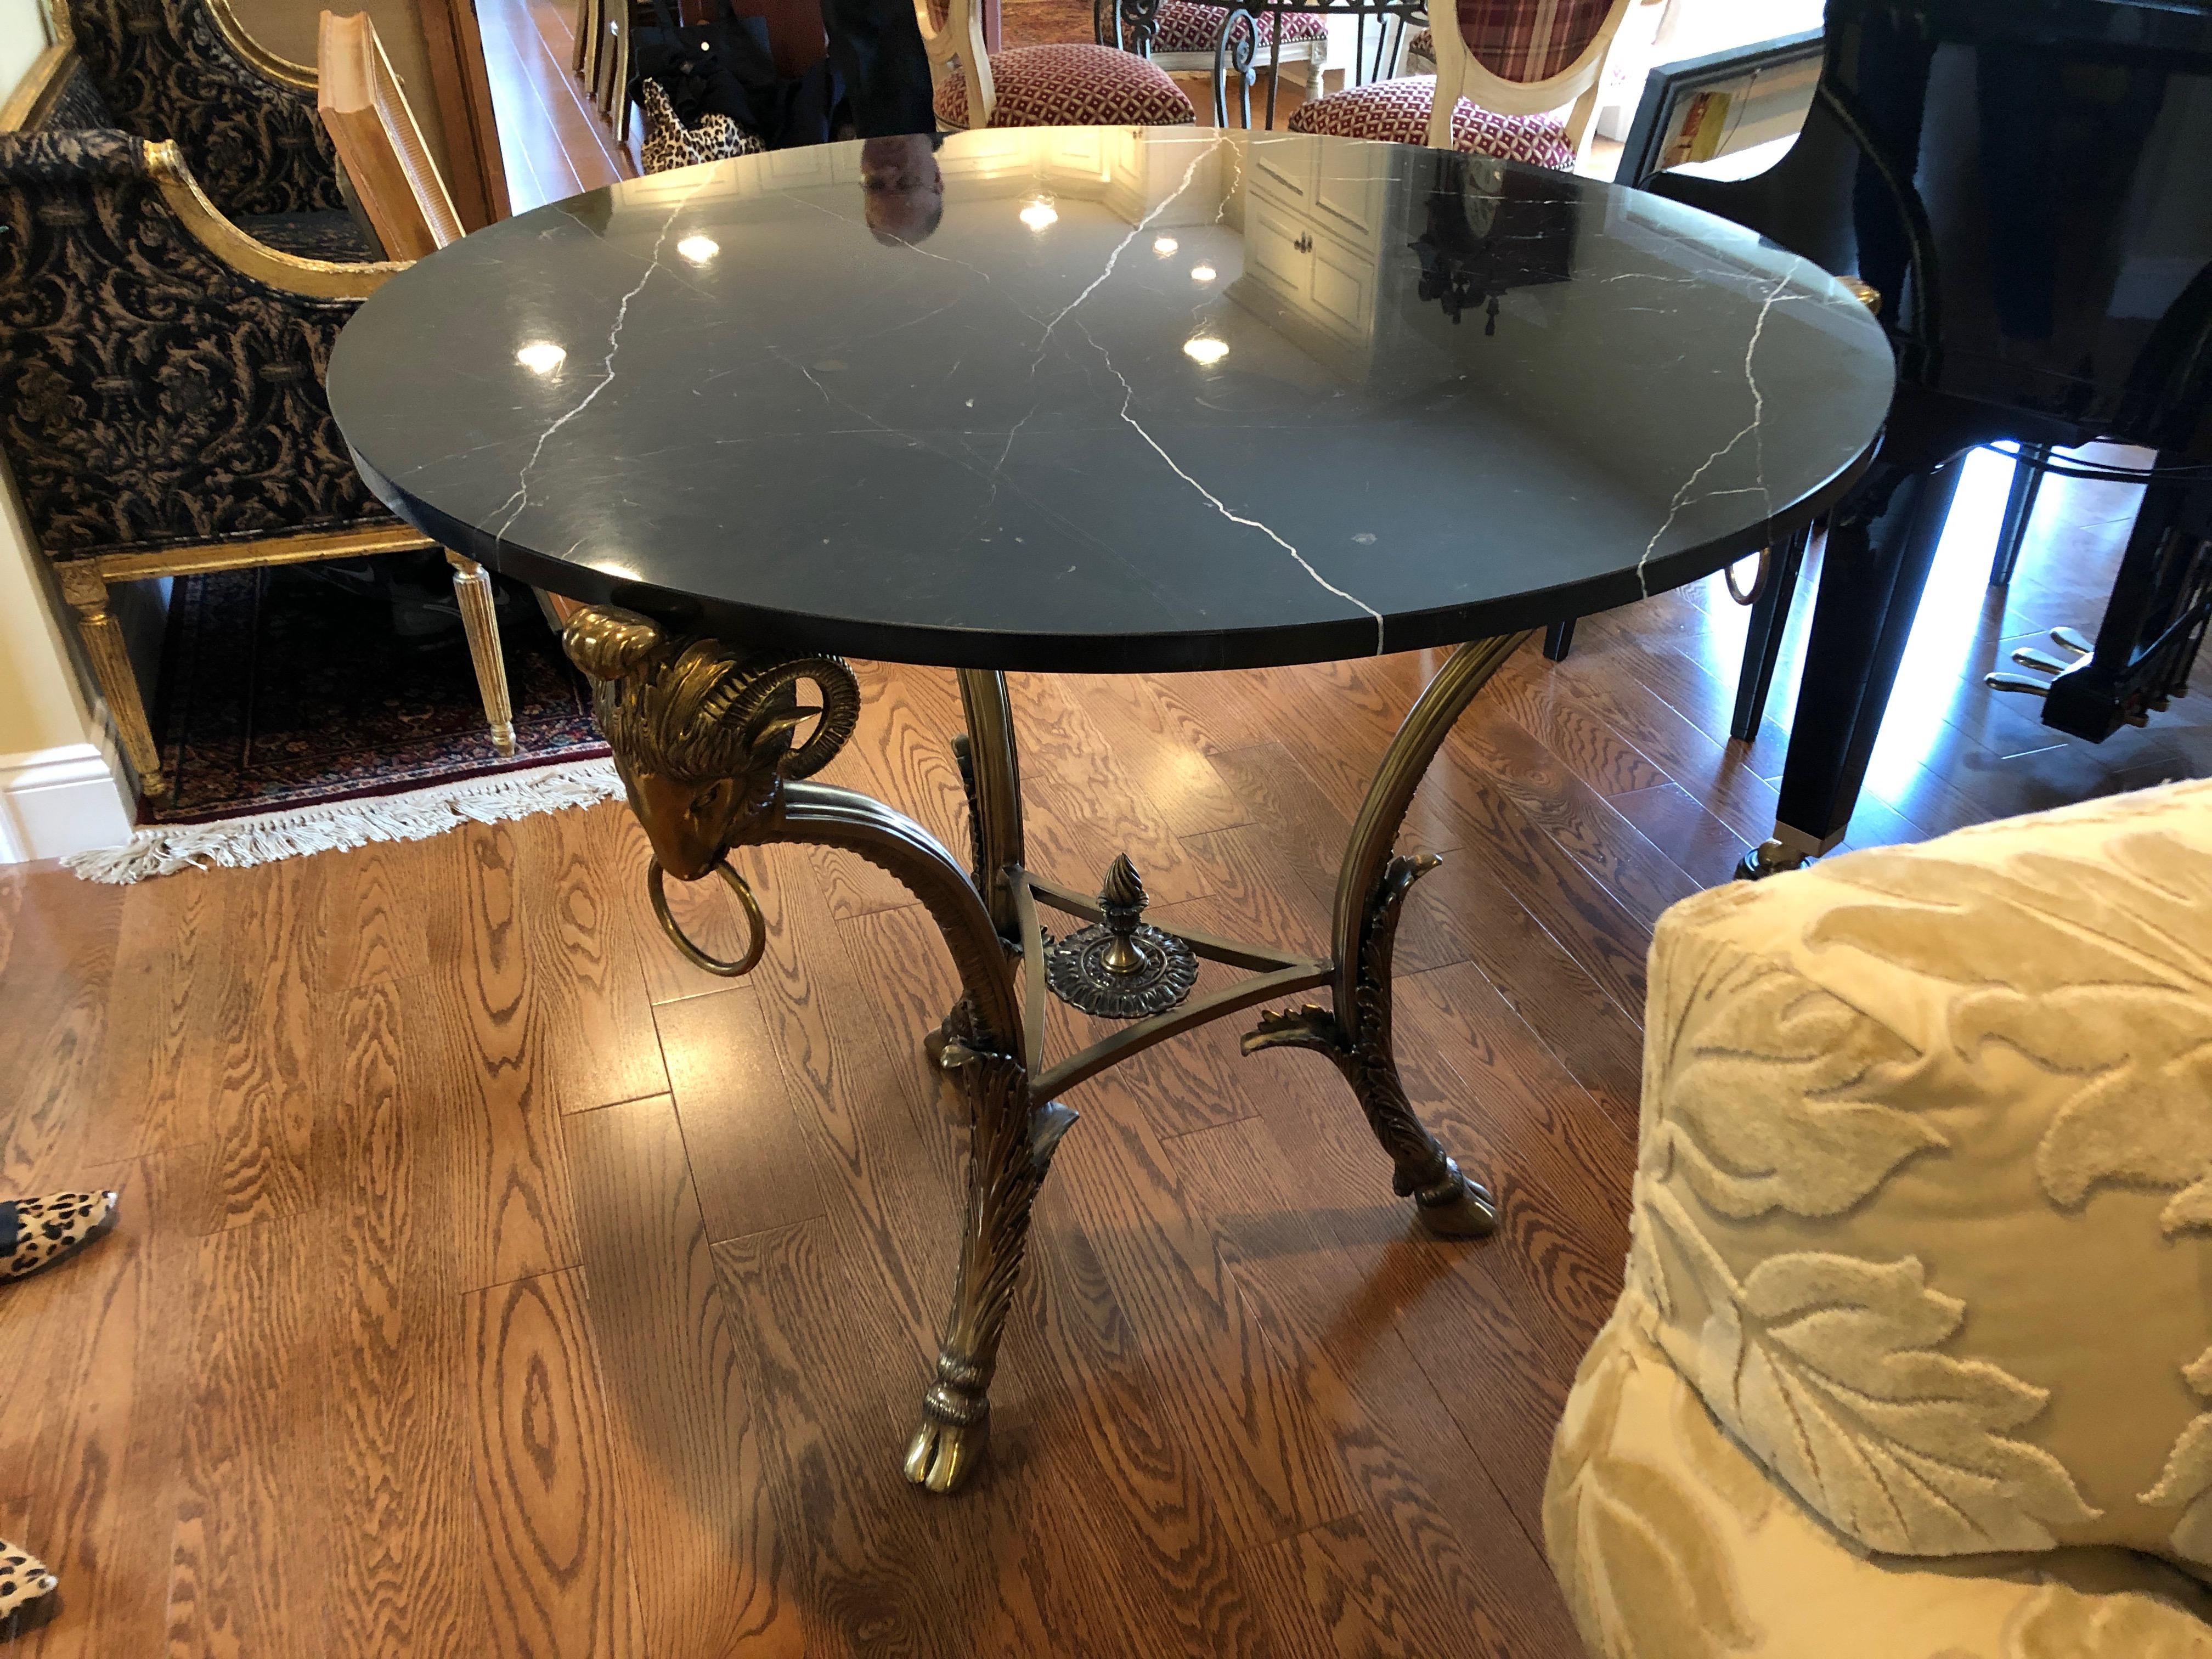 Moviestar glamorous centre round table by LaBarge, having a black marble top with white grain and sensational brass base with chunky ram's heads supporting the top, hoof feet, and a centre decorative finial.